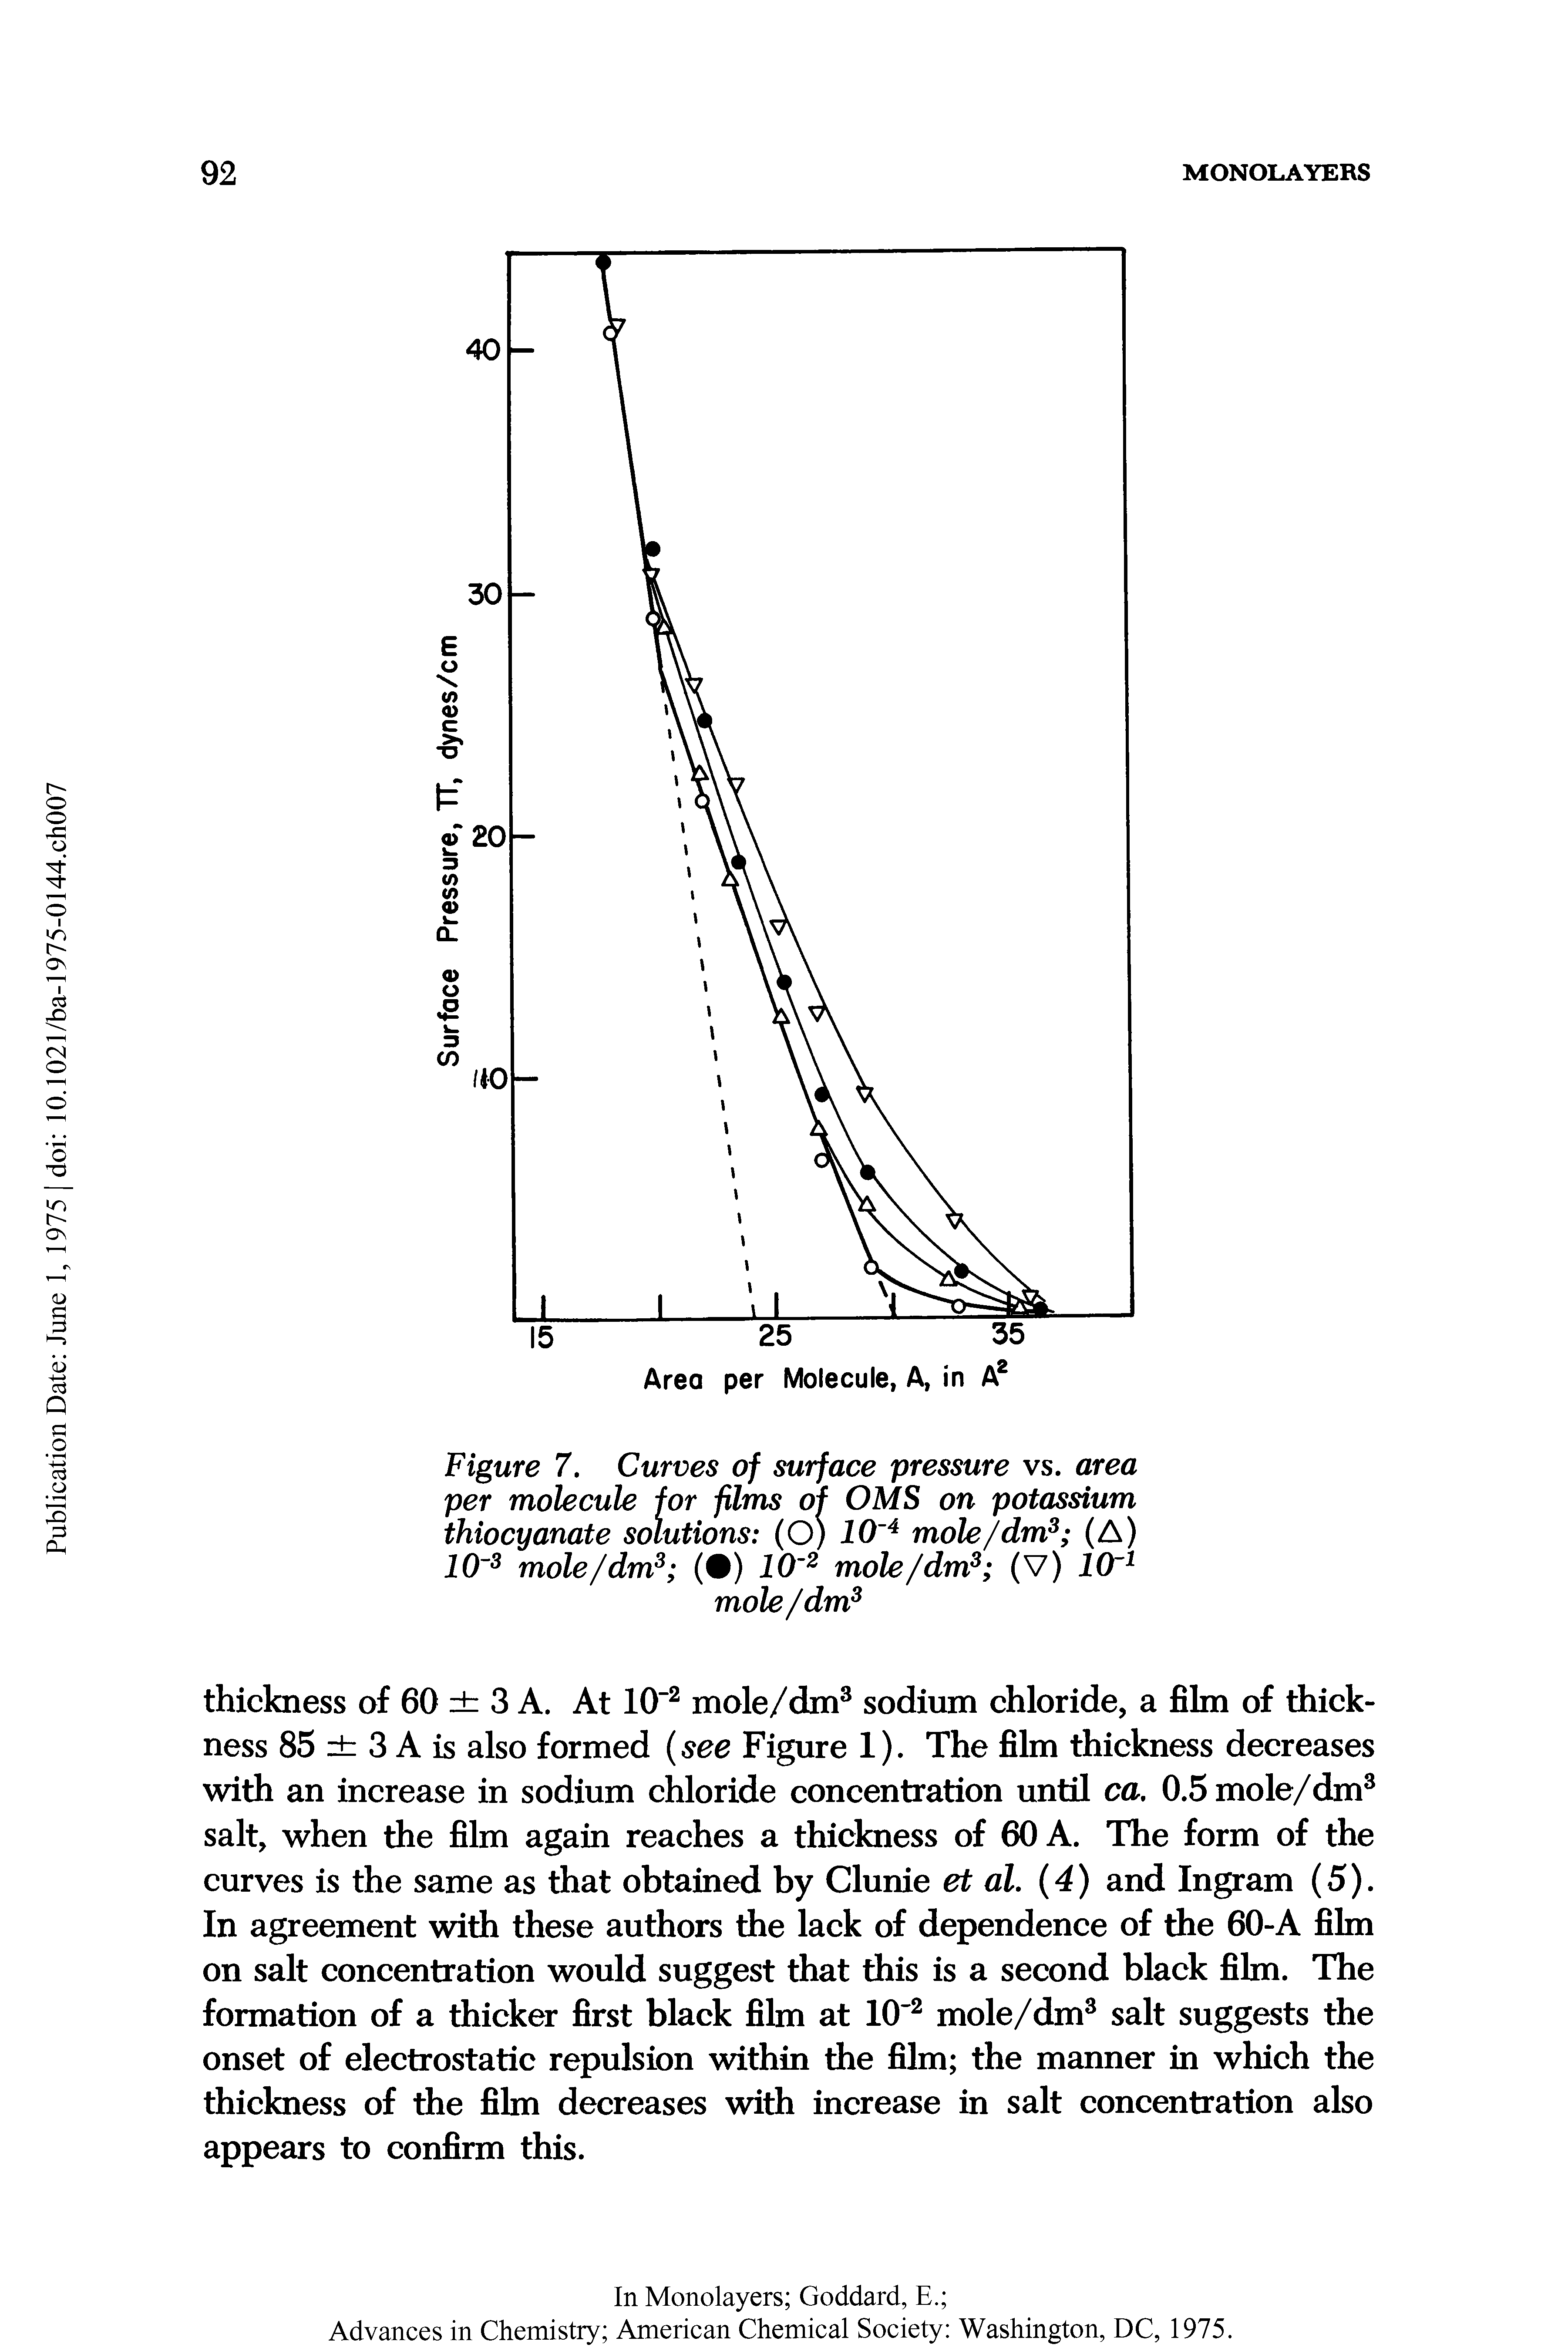 Figure 7. Curves of surface pressure vs. area per molecule for films of OMS on potassium thiocyanate solutions (O) 10 4 mole/dm3 (A)...